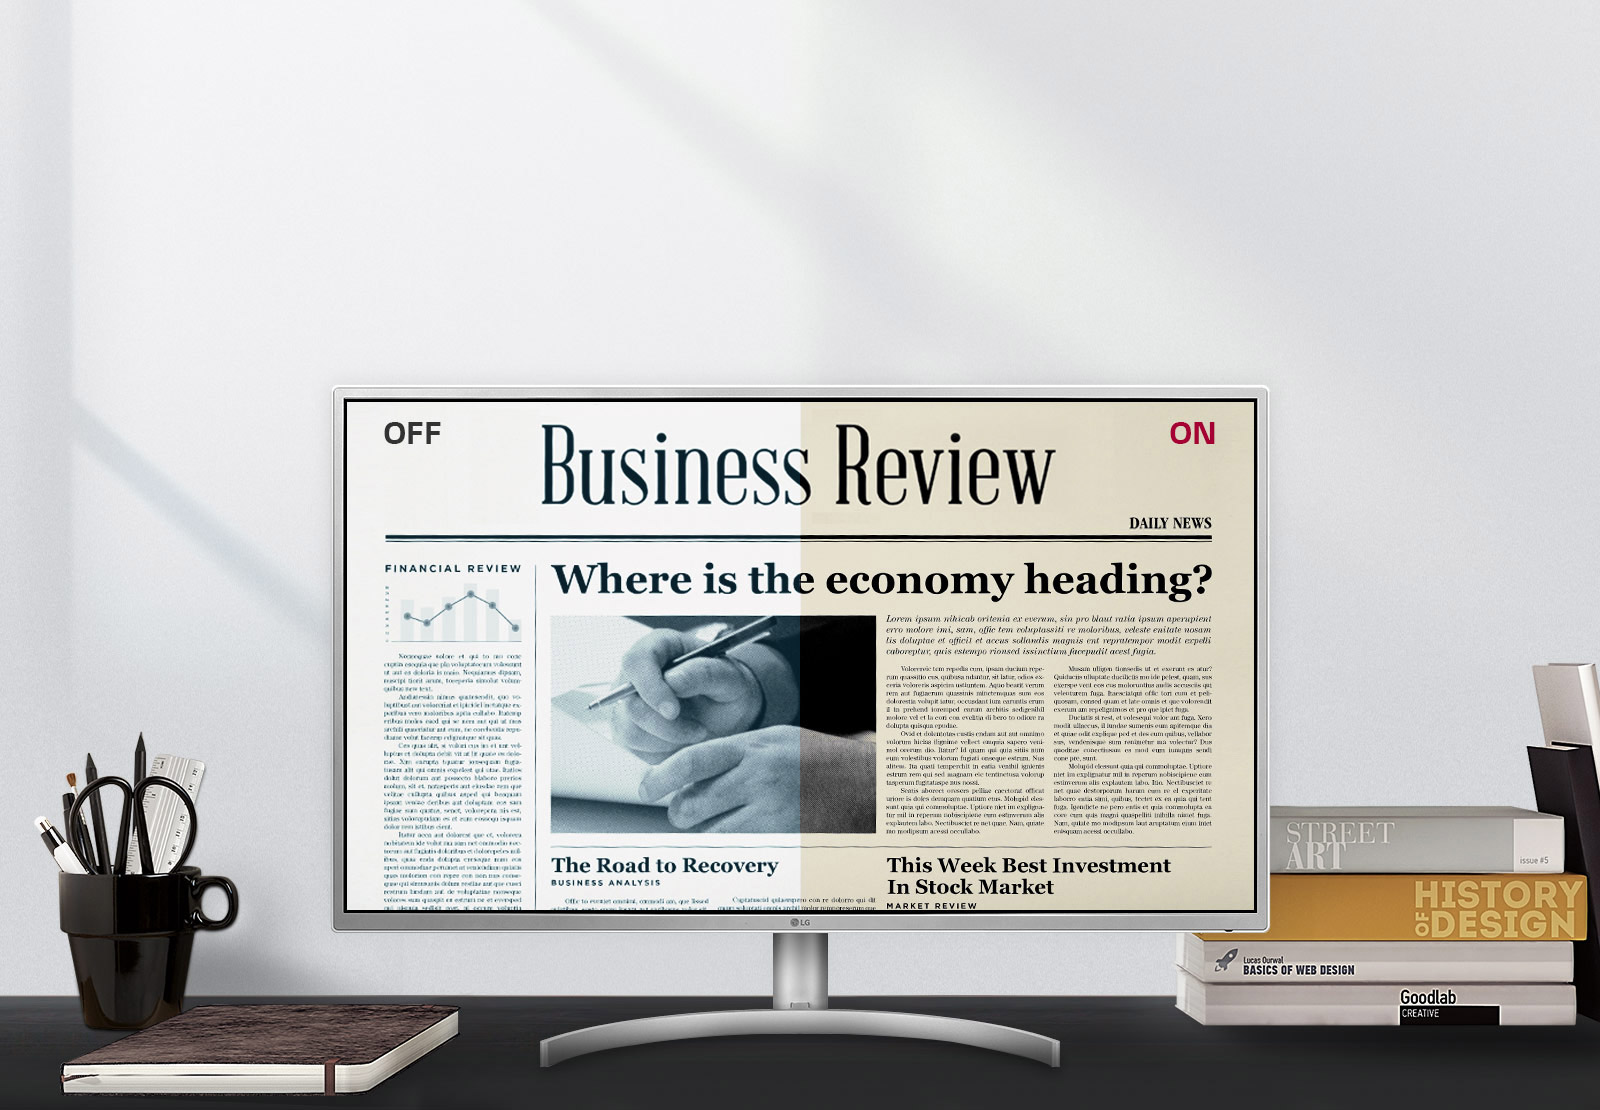 The LG 32QK500-W monitor showing a business review news article in an office setting